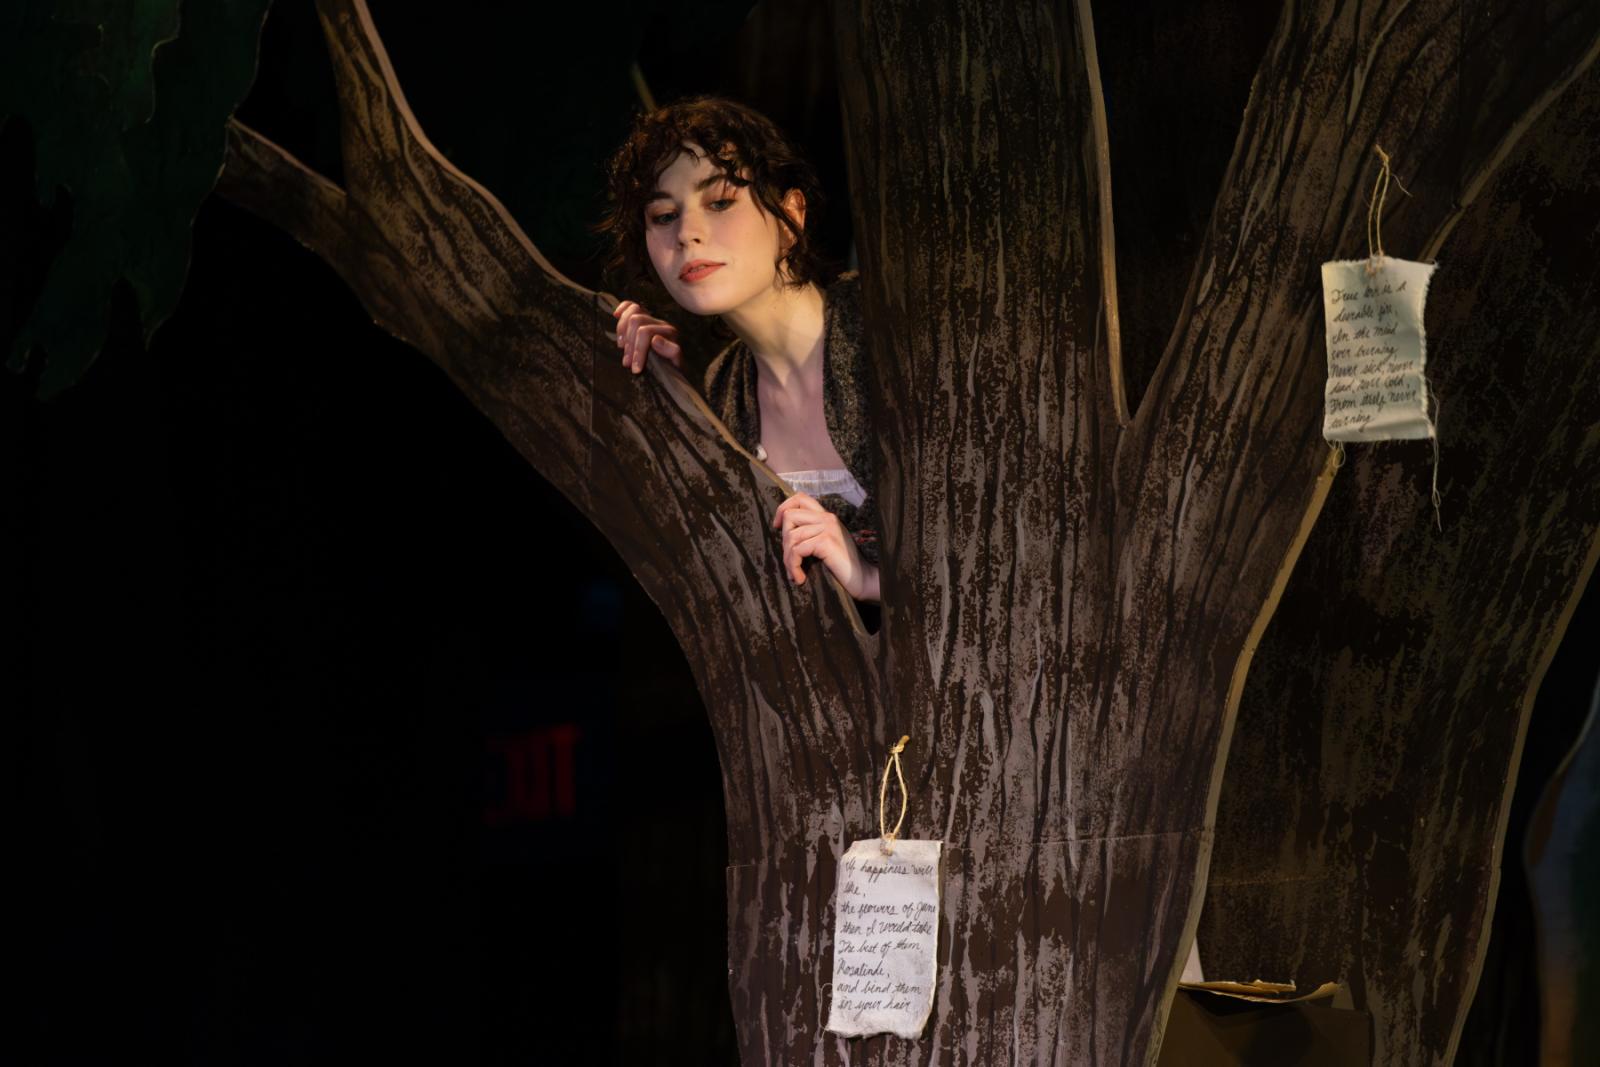 A cast member looks on from a tree on stage.